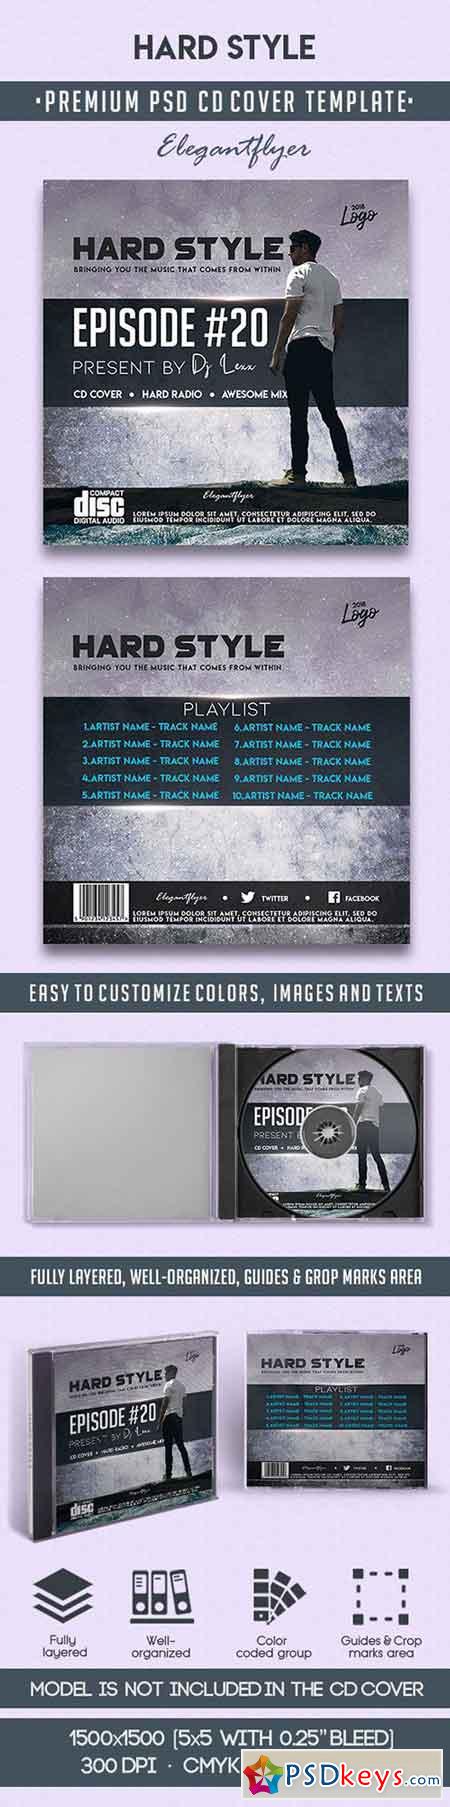 Hard Style CD Cover in PSD